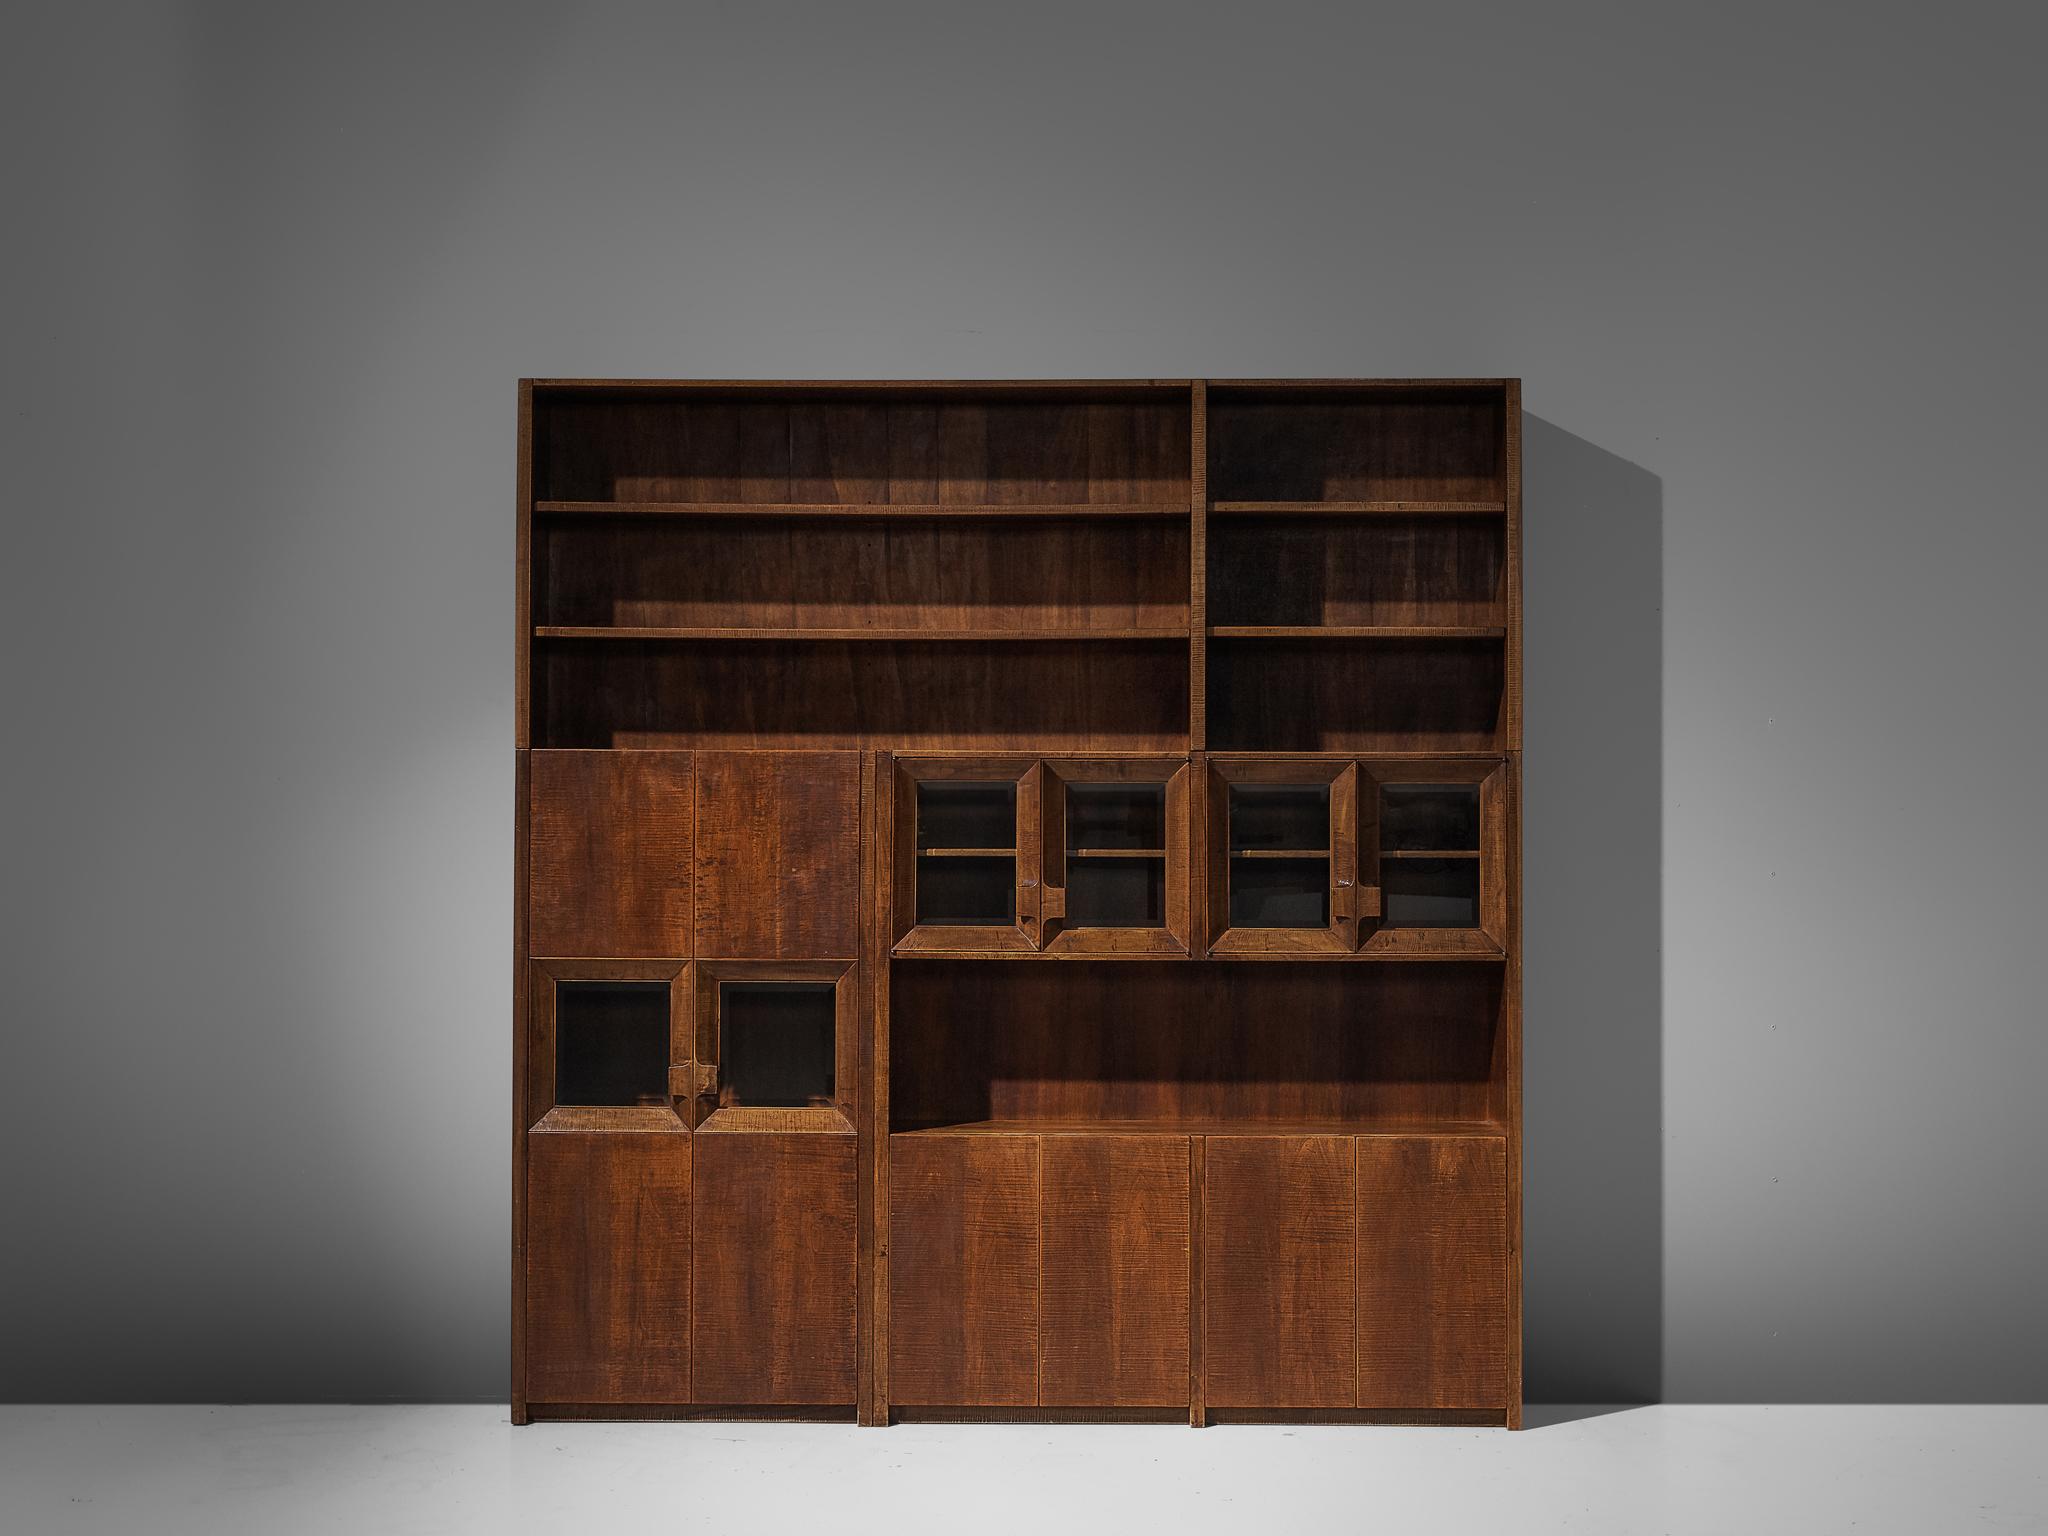 Giuseppe Rivadossi, bookcase, oak, Italy, circa 1970

An exceptional cabinet by the Italian sculptor Giuseppe Rivadossi, featuring a high level of craftsmanship in woodwork. The wood is completely carved with gouge cut, which gives this piece its